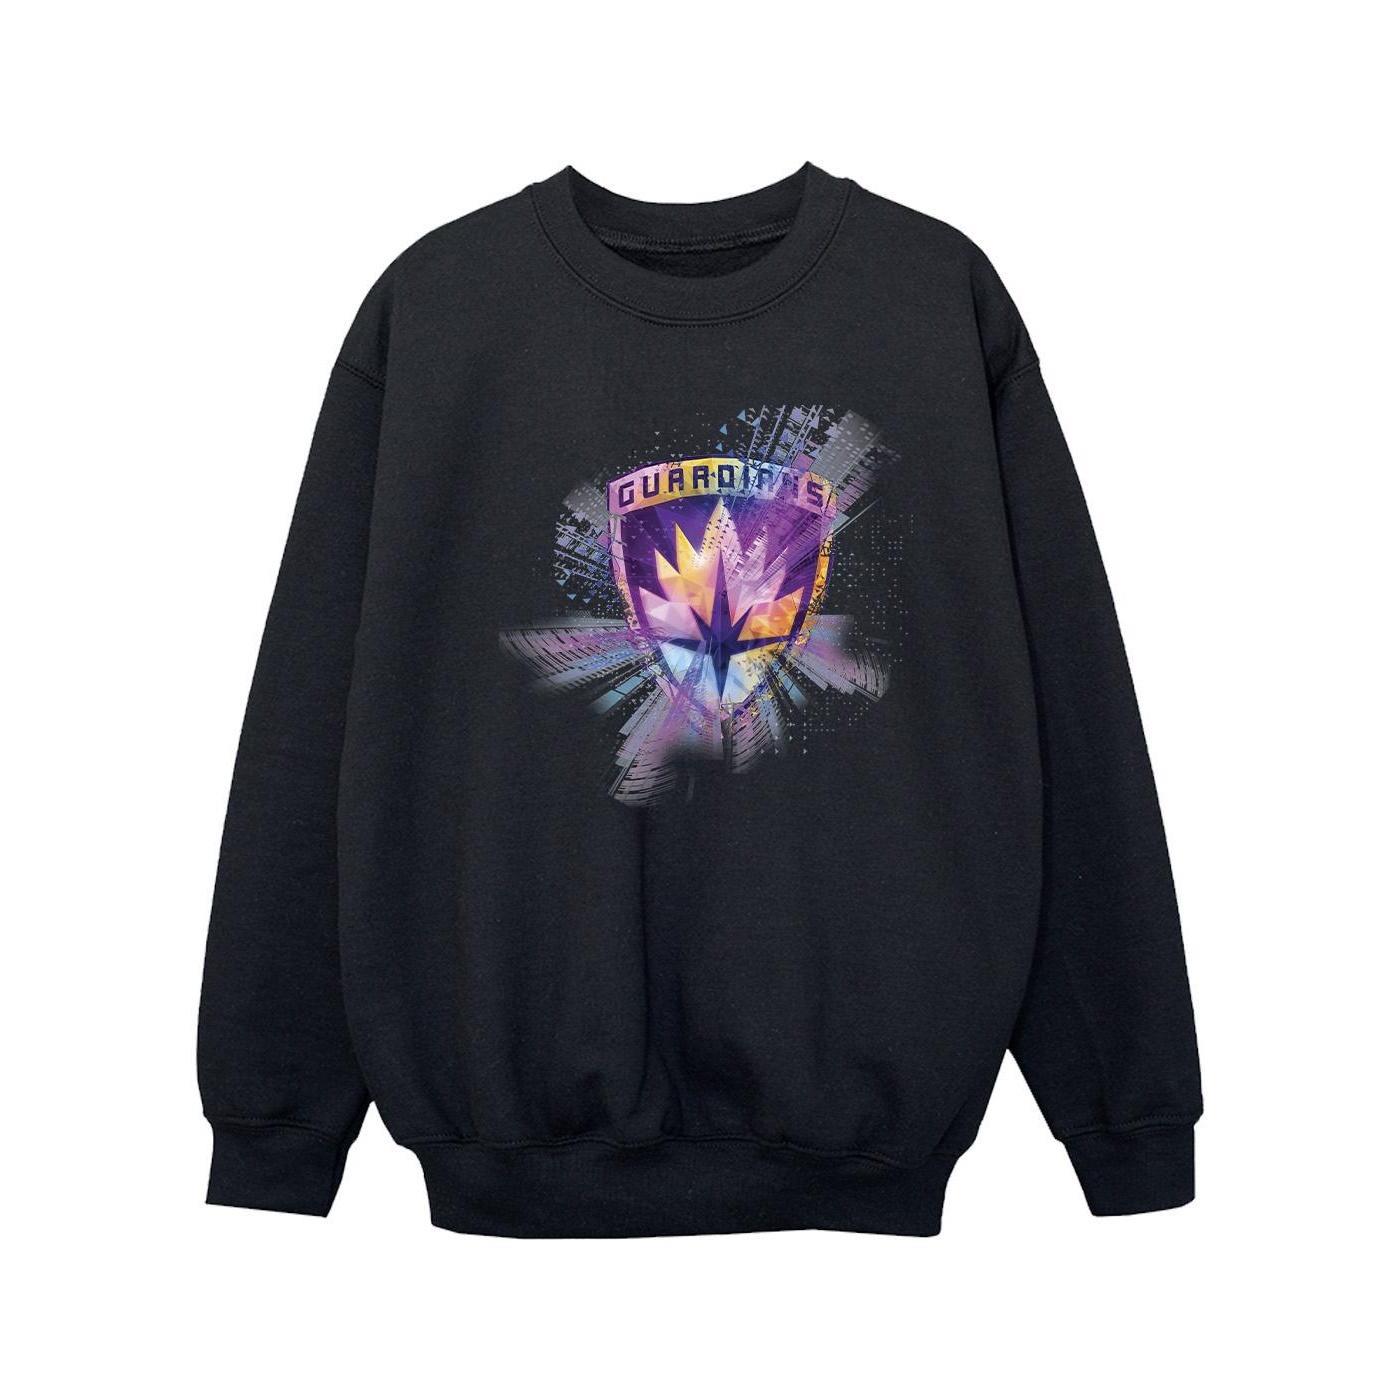 Marvel Girls Guardians Of The Galaxy Abstract Star Lord Sweatshirt (Black) (7-8 Years)